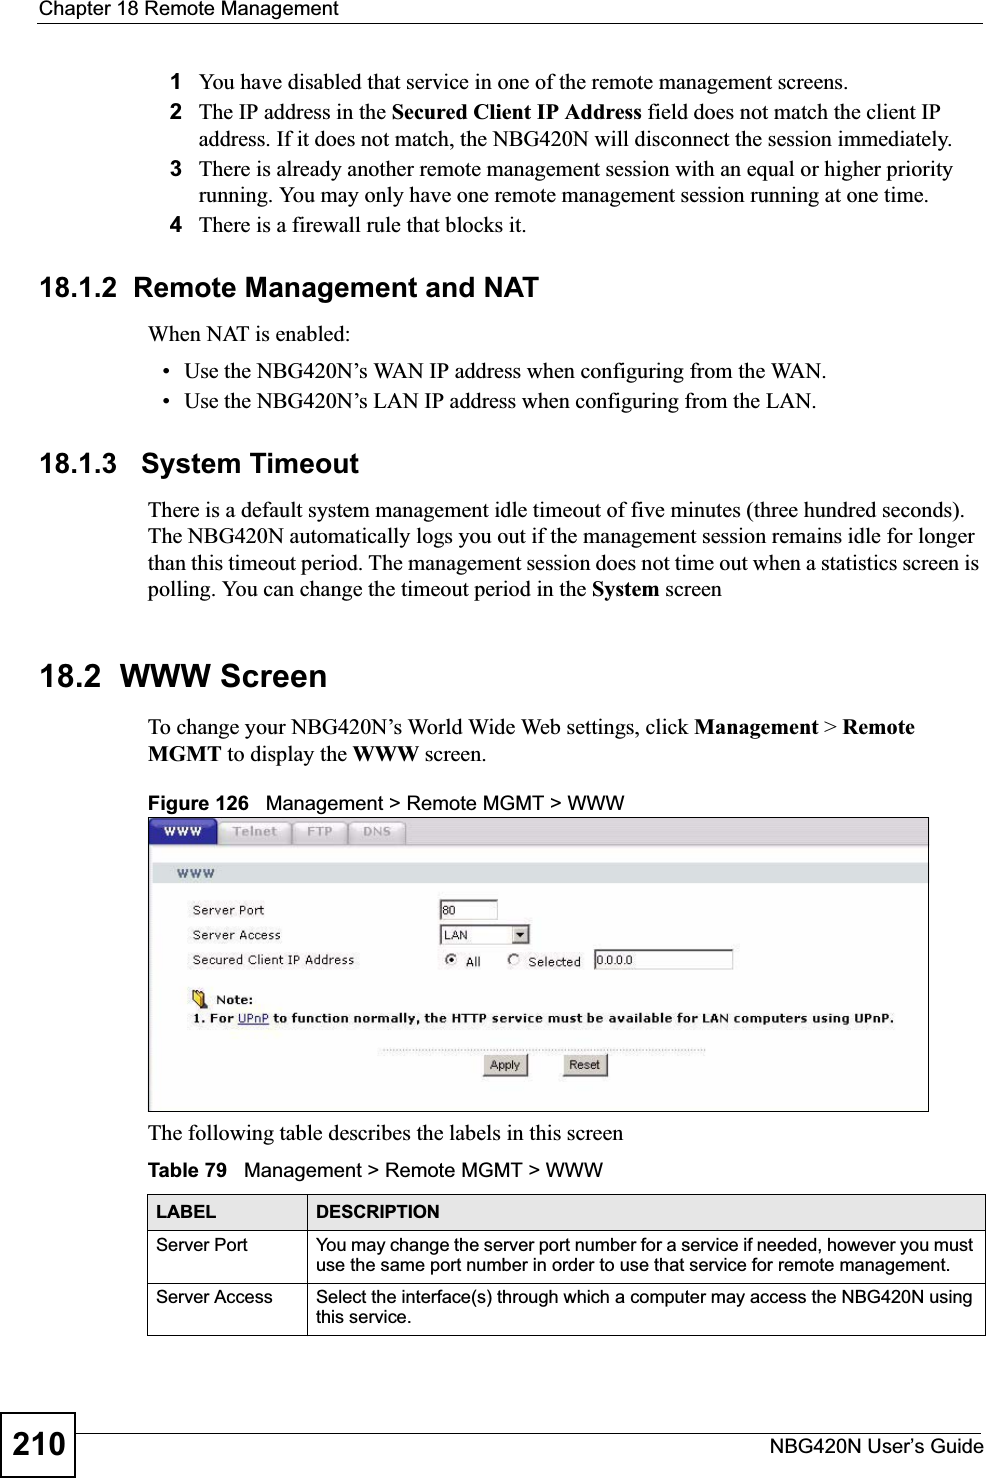 Chapter 18 Remote ManagementNBG420N User’s Guide2101You have disabled that service in one of the remote management screens.2The IP address in the Secured Client IP Address field does not match the client IP address. If it does not match, the NBG420N will disconnect the session immediately.3There is already another remote management session with an equal or higher priority running. You may only have one remote management session running at one time.4There is a firewall rule that blocks it.18.1.2  Remote Management and NATWhen NAT is enabled:• Use the NBG420N’s WAN IP address when configuring from the WAN. • Use the NBG420N’s LAN IP address when configuring from the LAN.18.1.3   System TimeoutThere is a default system management idle timeout of five minutes (three hundred seconds). The NBG420N automatically logs you out if the management session remains idle for longer than this timeout period. The management session does not time out when a statistics screen is polling. You can change the timeout period in the System screen18.2  WWW ScreenTo change your NBG420N’s World Wide Web settings, click Management &gt; Remote MGMT to display the WWW screen.Figure 126   Management &gt; Remote MGMT &gt; WWW The following table describes the labels in this screenTable 79   Management &gt; Remote MGMT &gt; WWWLABEL DESCRIPTIONServer Port You may change the server port number for a service if needed, however you must use the same port number in order to use that service for remote management.Server Access Select the interface(s) through which a computer may access the NBG420N using this service.